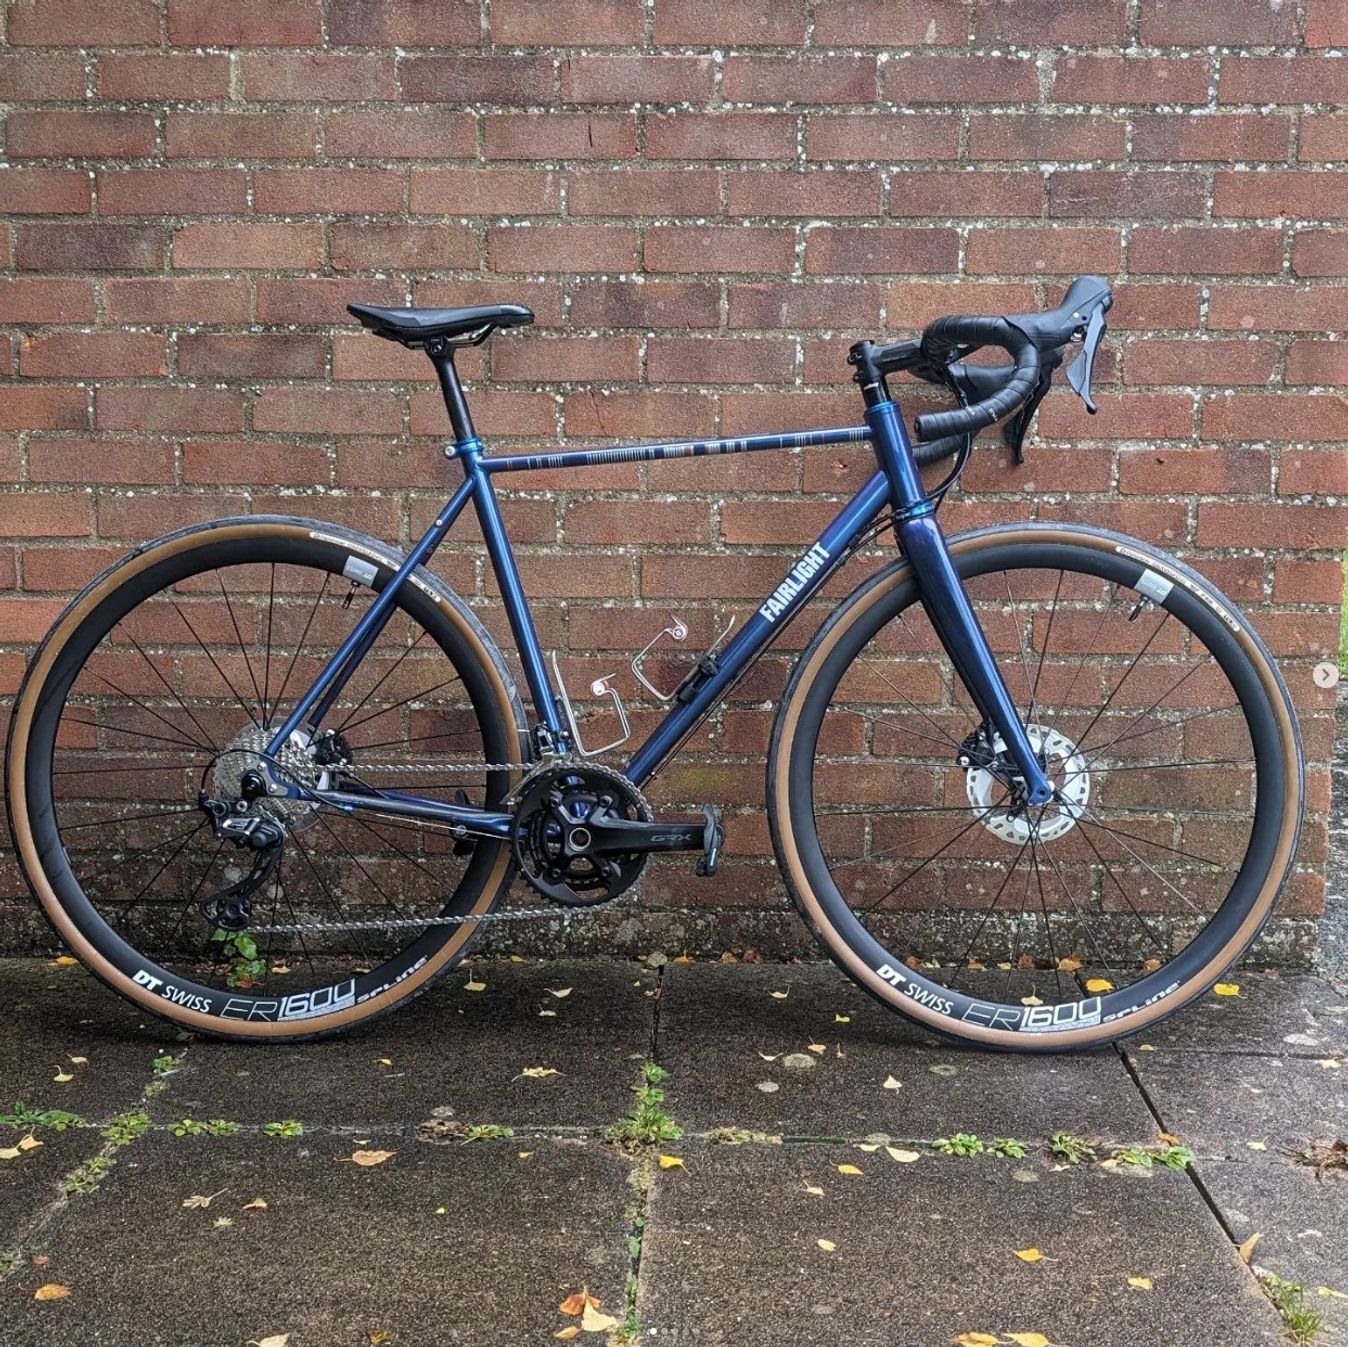 This submission from Steve shows off his Farlight steel road bike